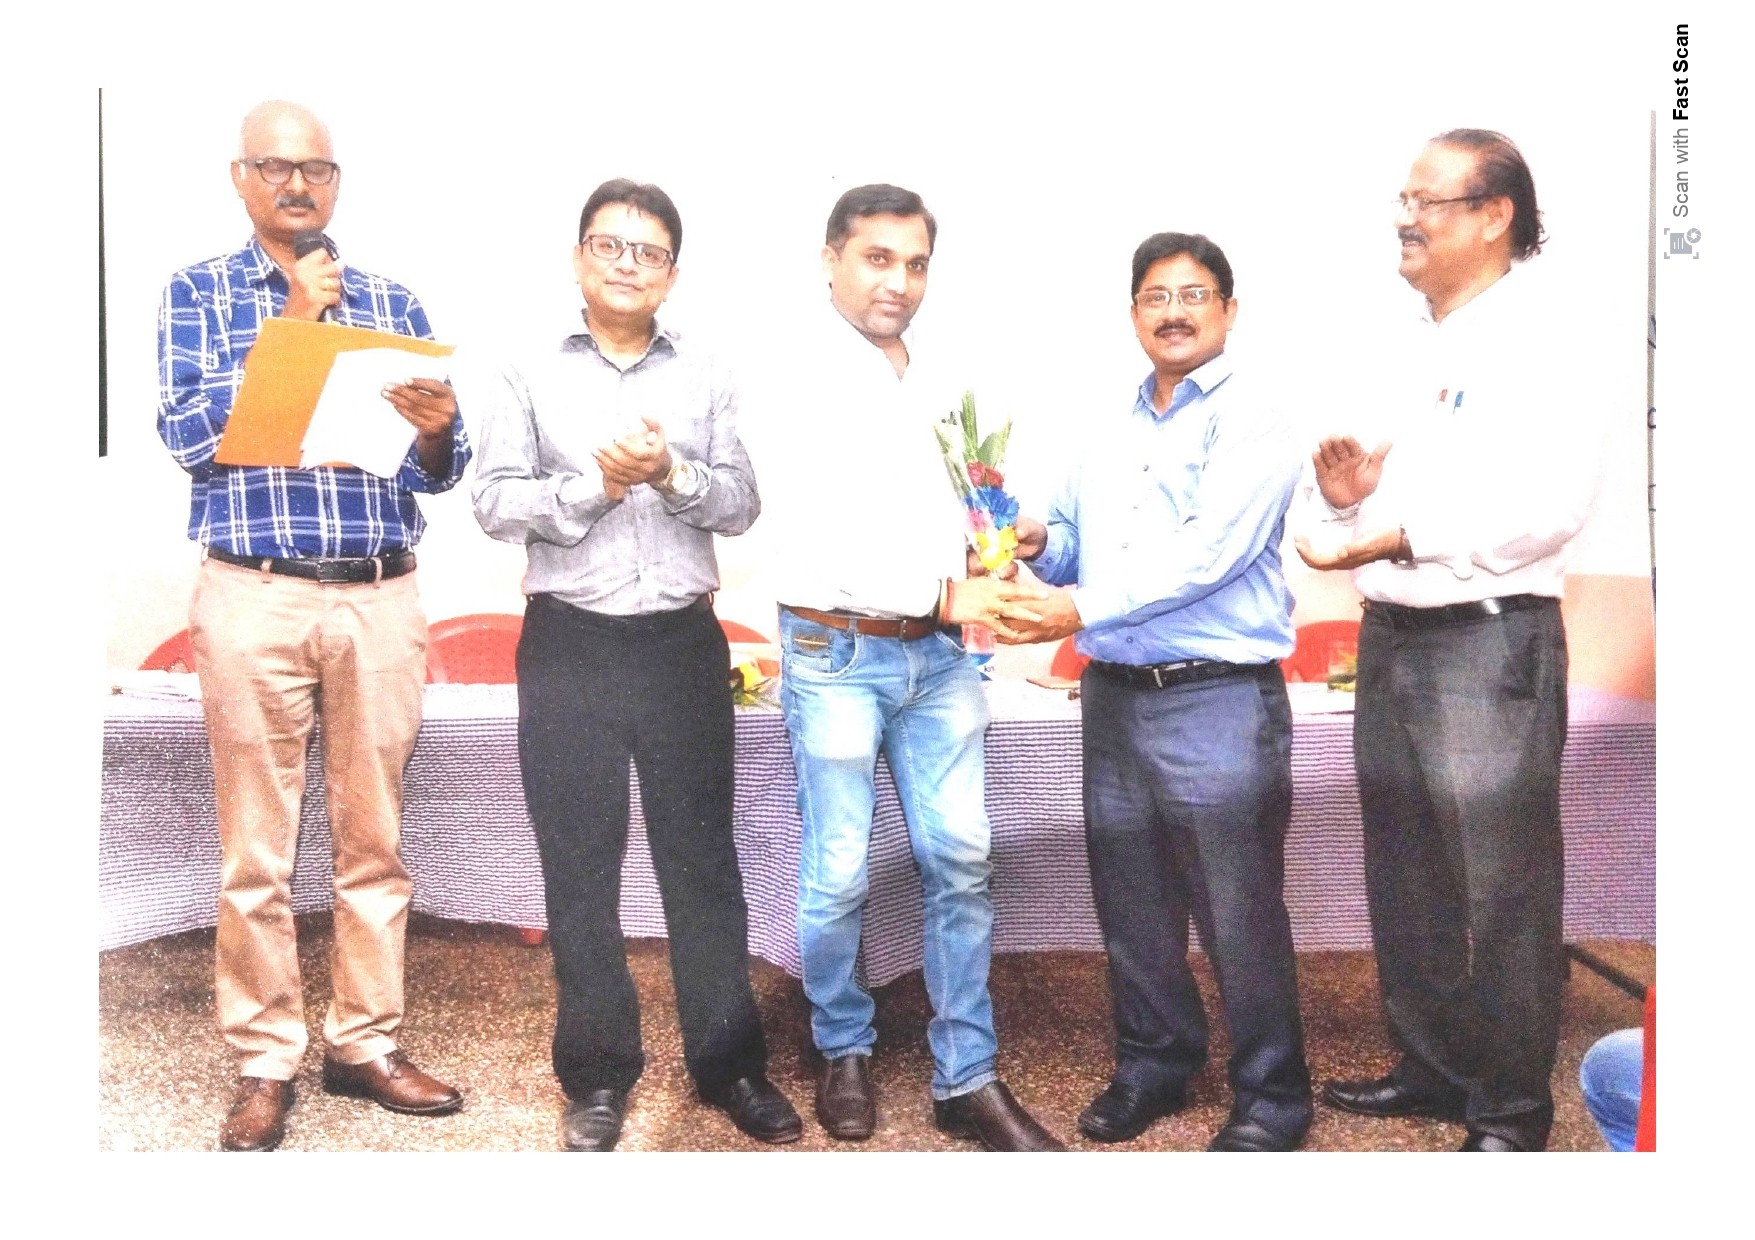 RECEIVED TROPHY FOR BEST PERFORMANCE